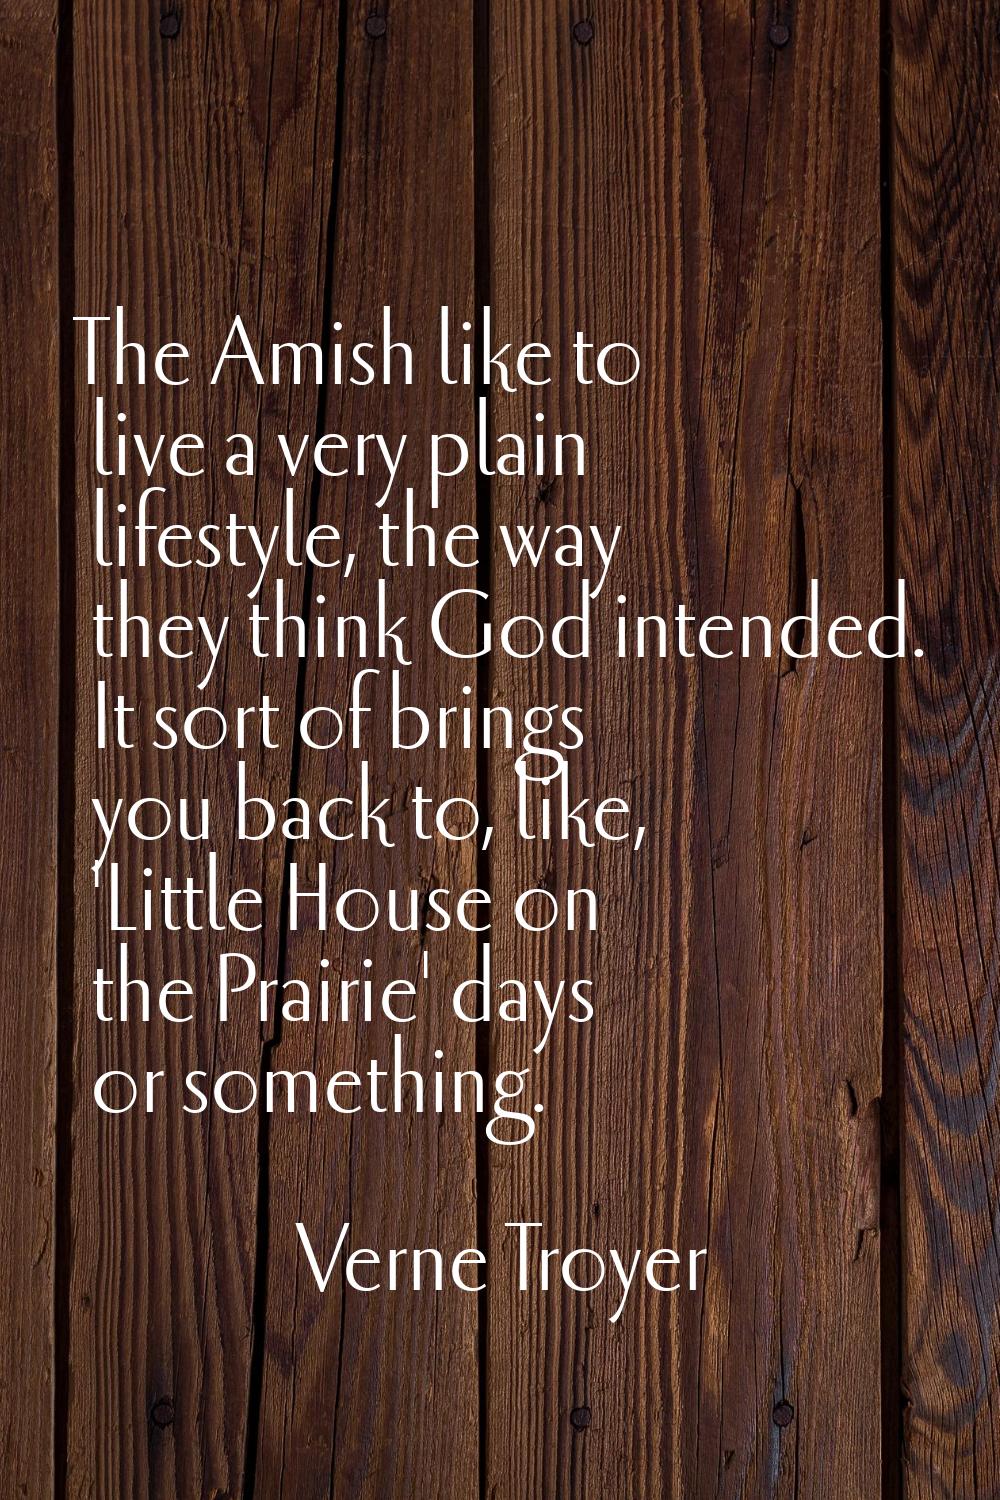 The Amish like to live a very plain lifestyle, the way they think God intended. It sort of brings y